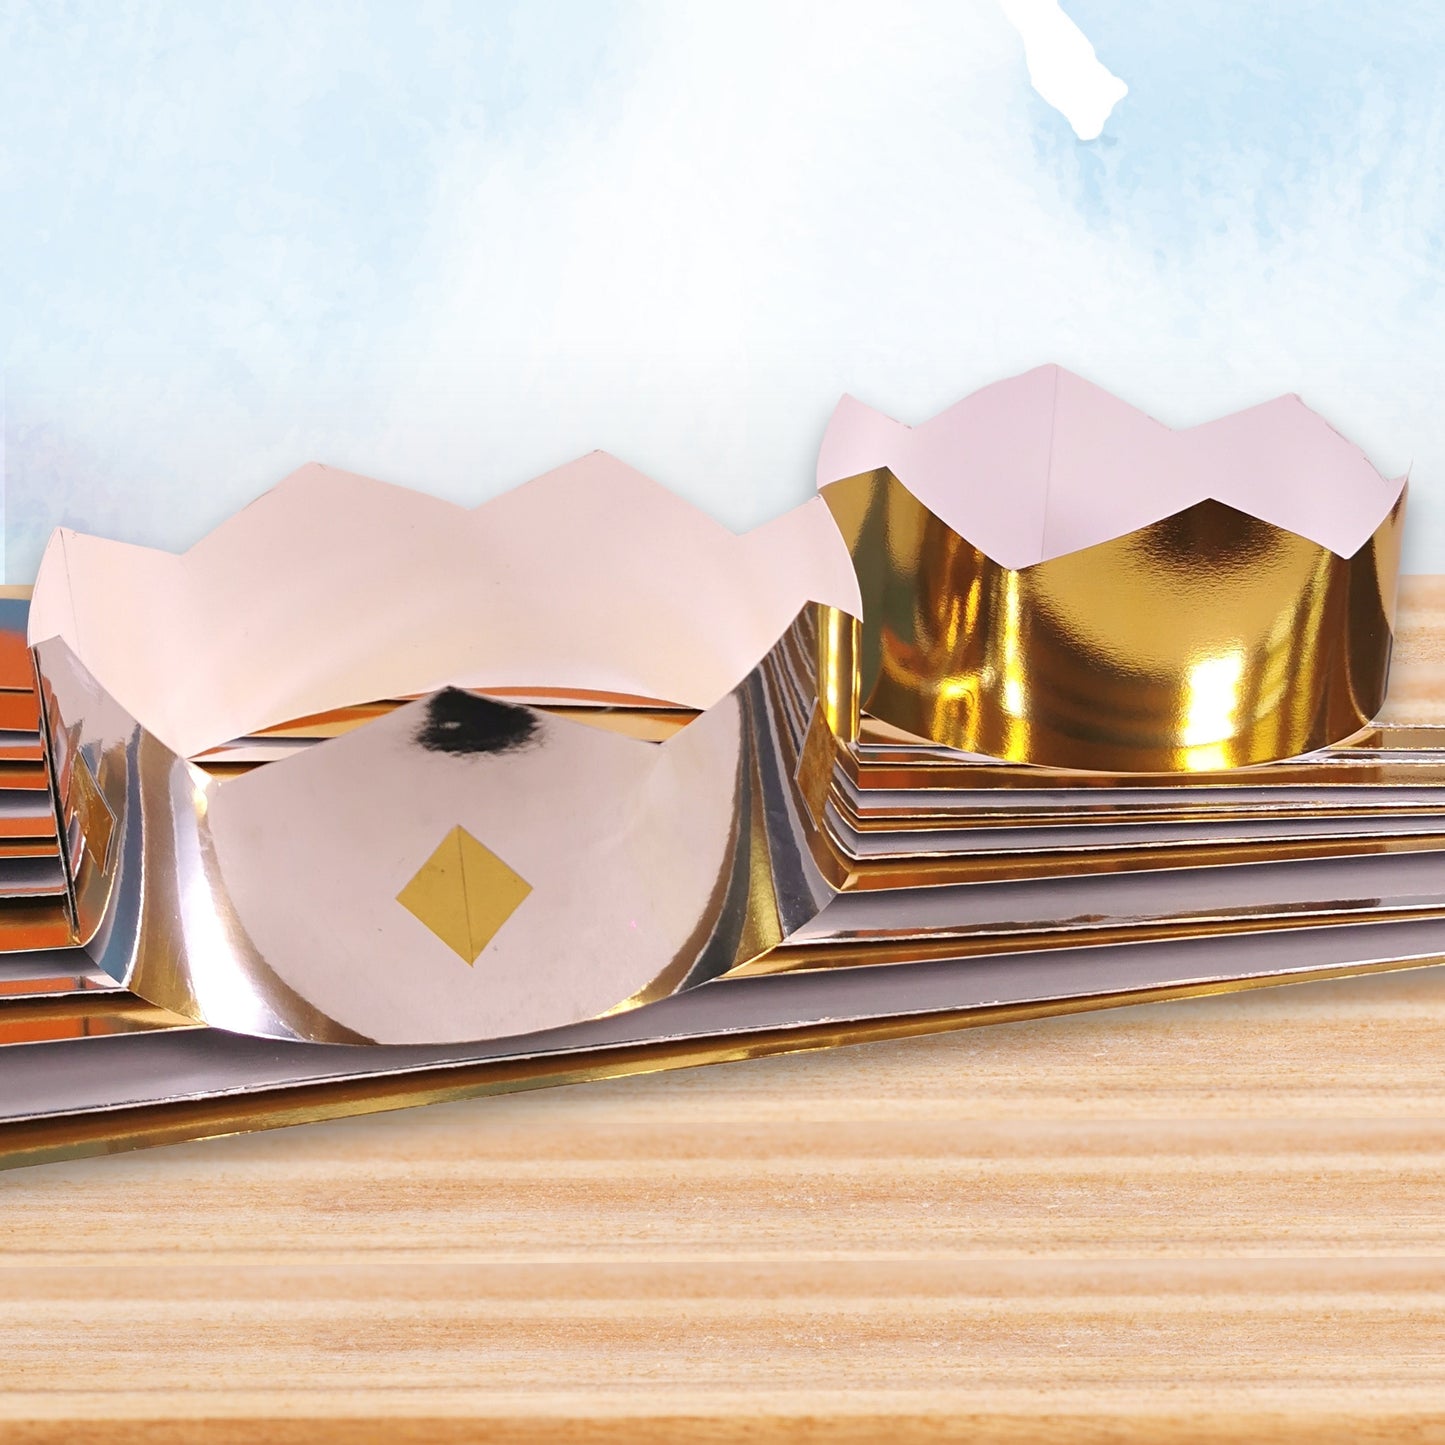 24 Metallic Gold & Silver Card Strips Crown Hat Making Strips, Design & Make Your Own Crowns To Decorate 63x7cm, 20cm Diameter